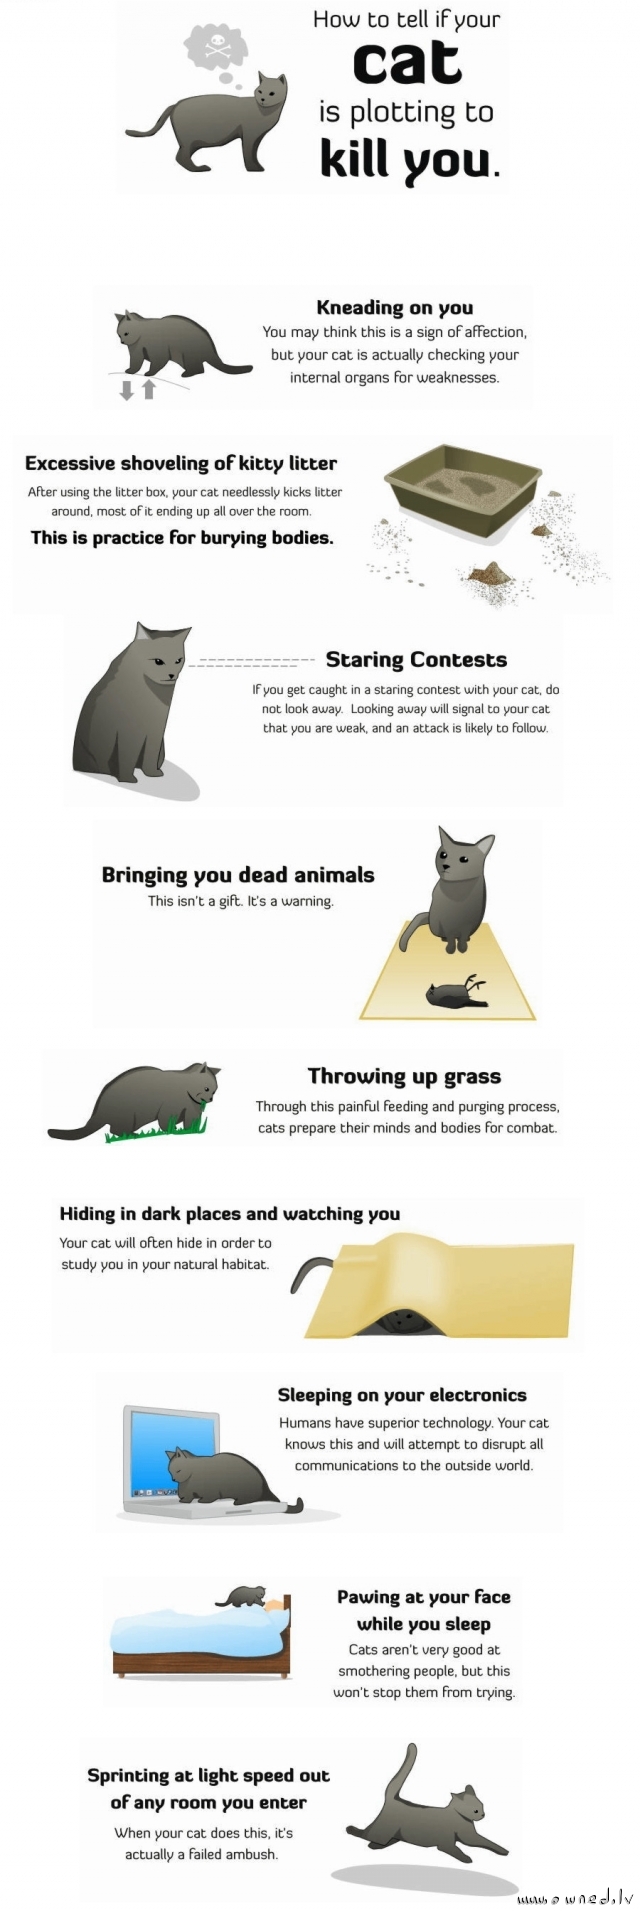 How to tell if your cat plotting to kill you